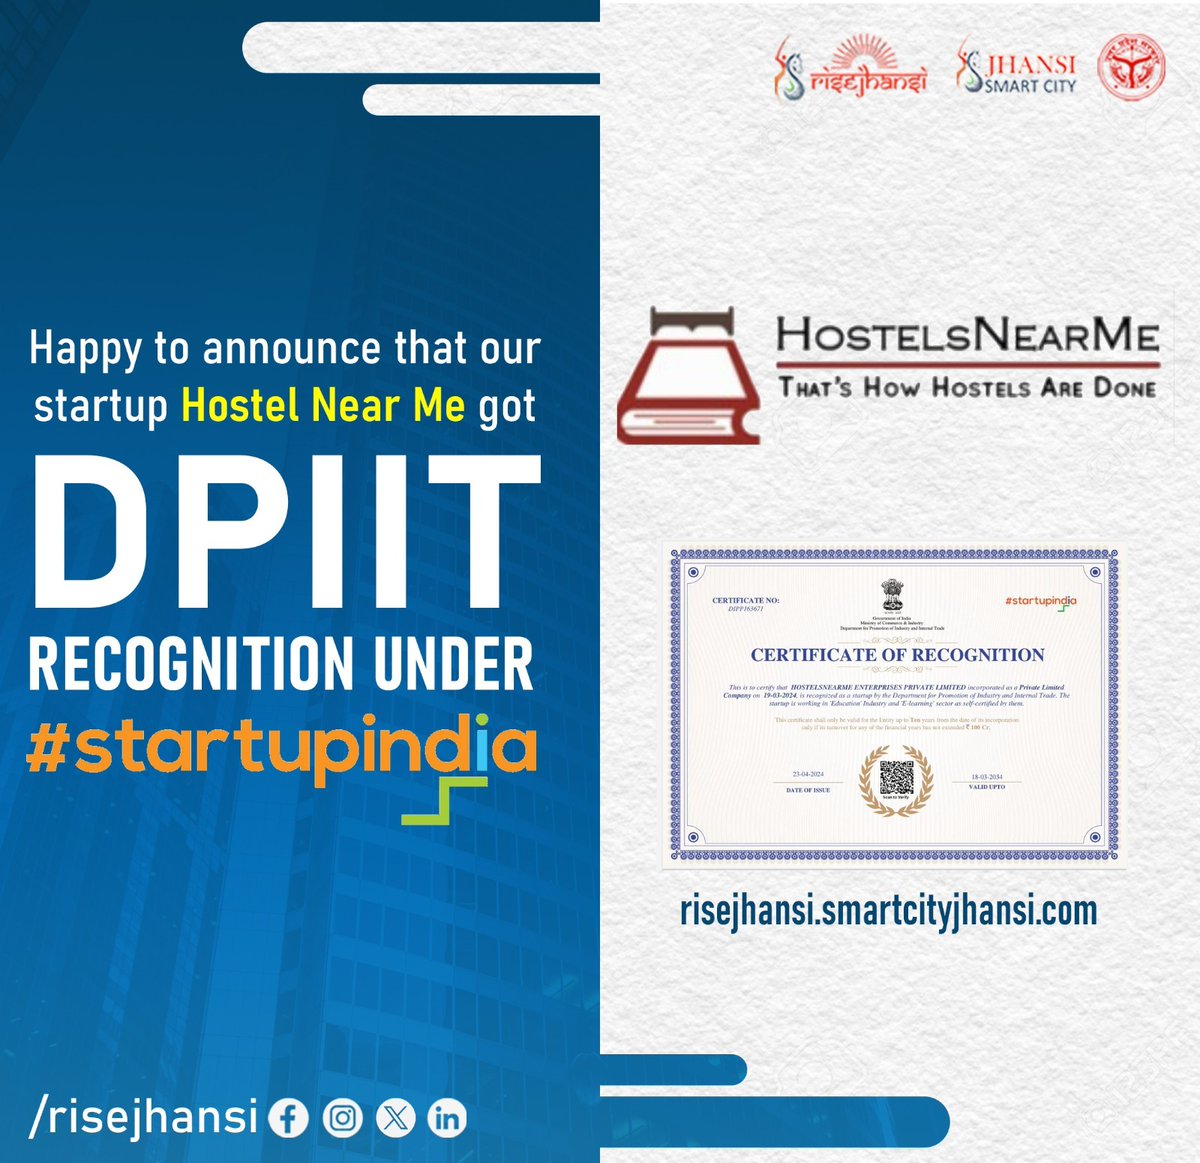 🎉 Exciting news! Hostel Near Me, incubated at RISE Jhansi Incubation Center, received DPIIT Recognition under #StartupIndia! 🚀 Congratulations to the team! 

#RISEJhansi #Incubationmasters #Jhansismartcity #Entrepreneurship #DPIITRecognition